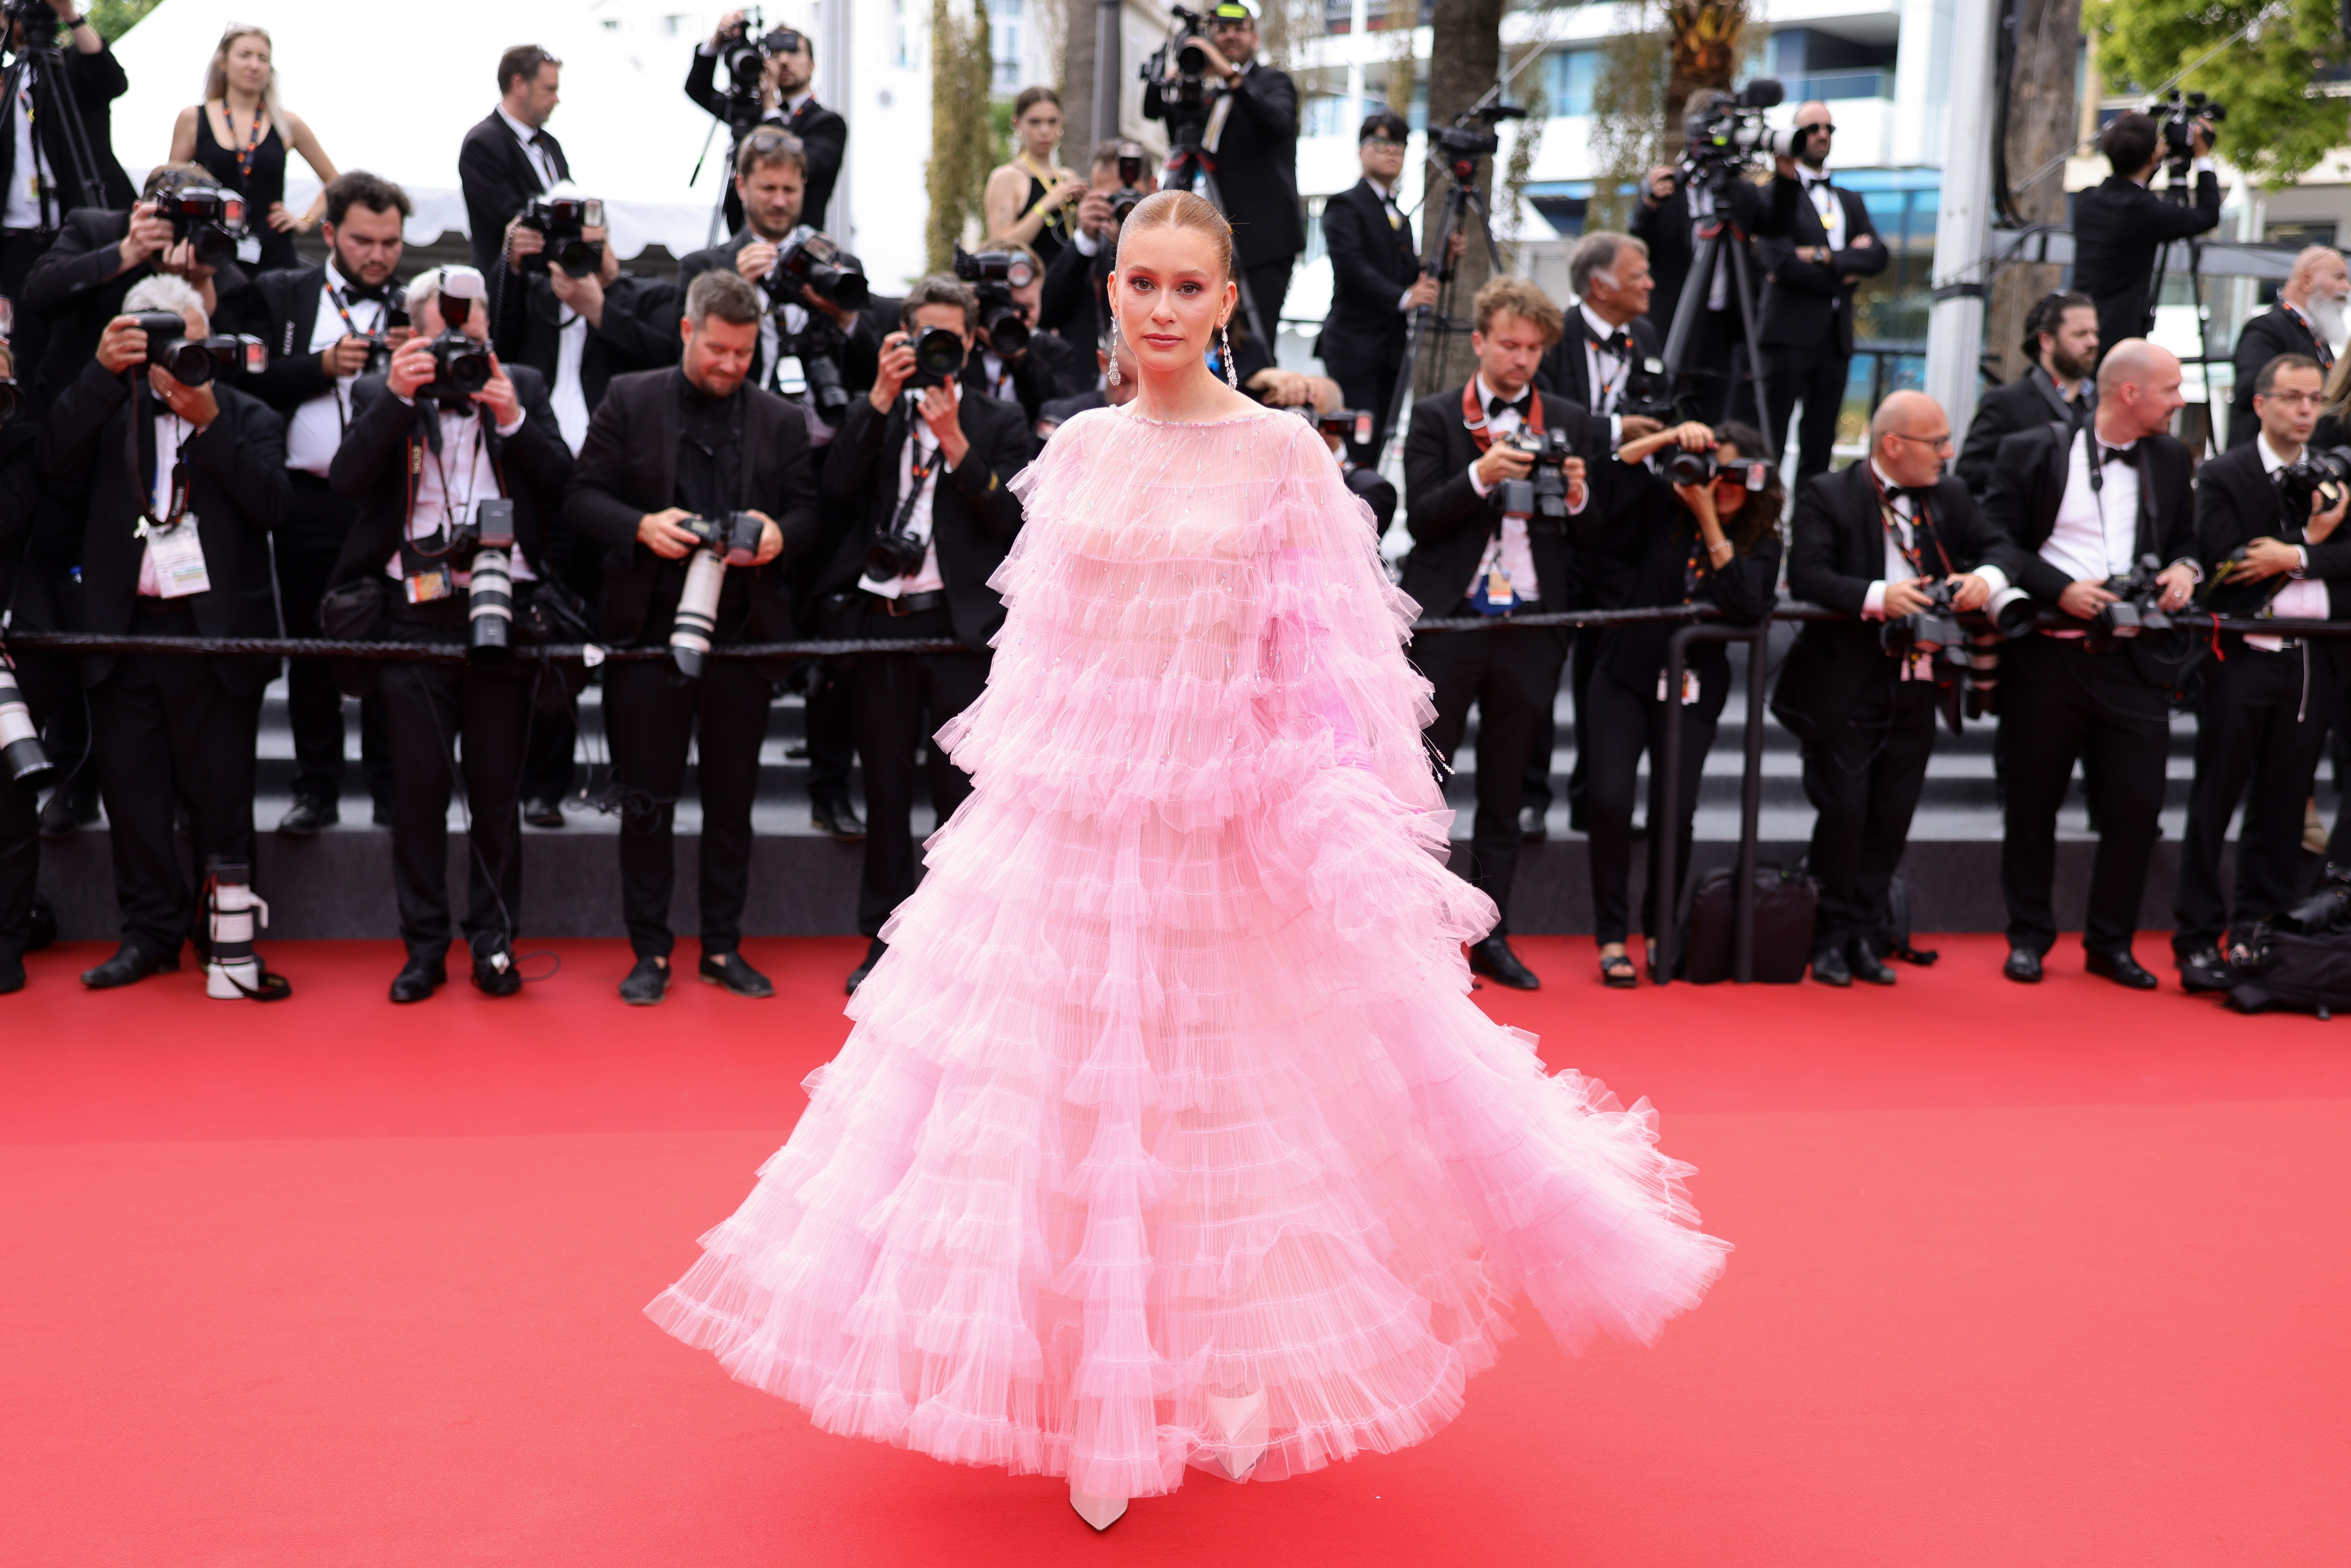 CANNES, FRANCE - MAY 23: Marina Ruy Barbosa attends the screening of "Decision To Leave (Heojil Kyolshim)" during the 75th annual Cannes film festival at Palais des Festivals on May 23, 2022 in Cannes, France. (Photo by Andreas Rentz/Getty Images) (Foto: Getty Images)